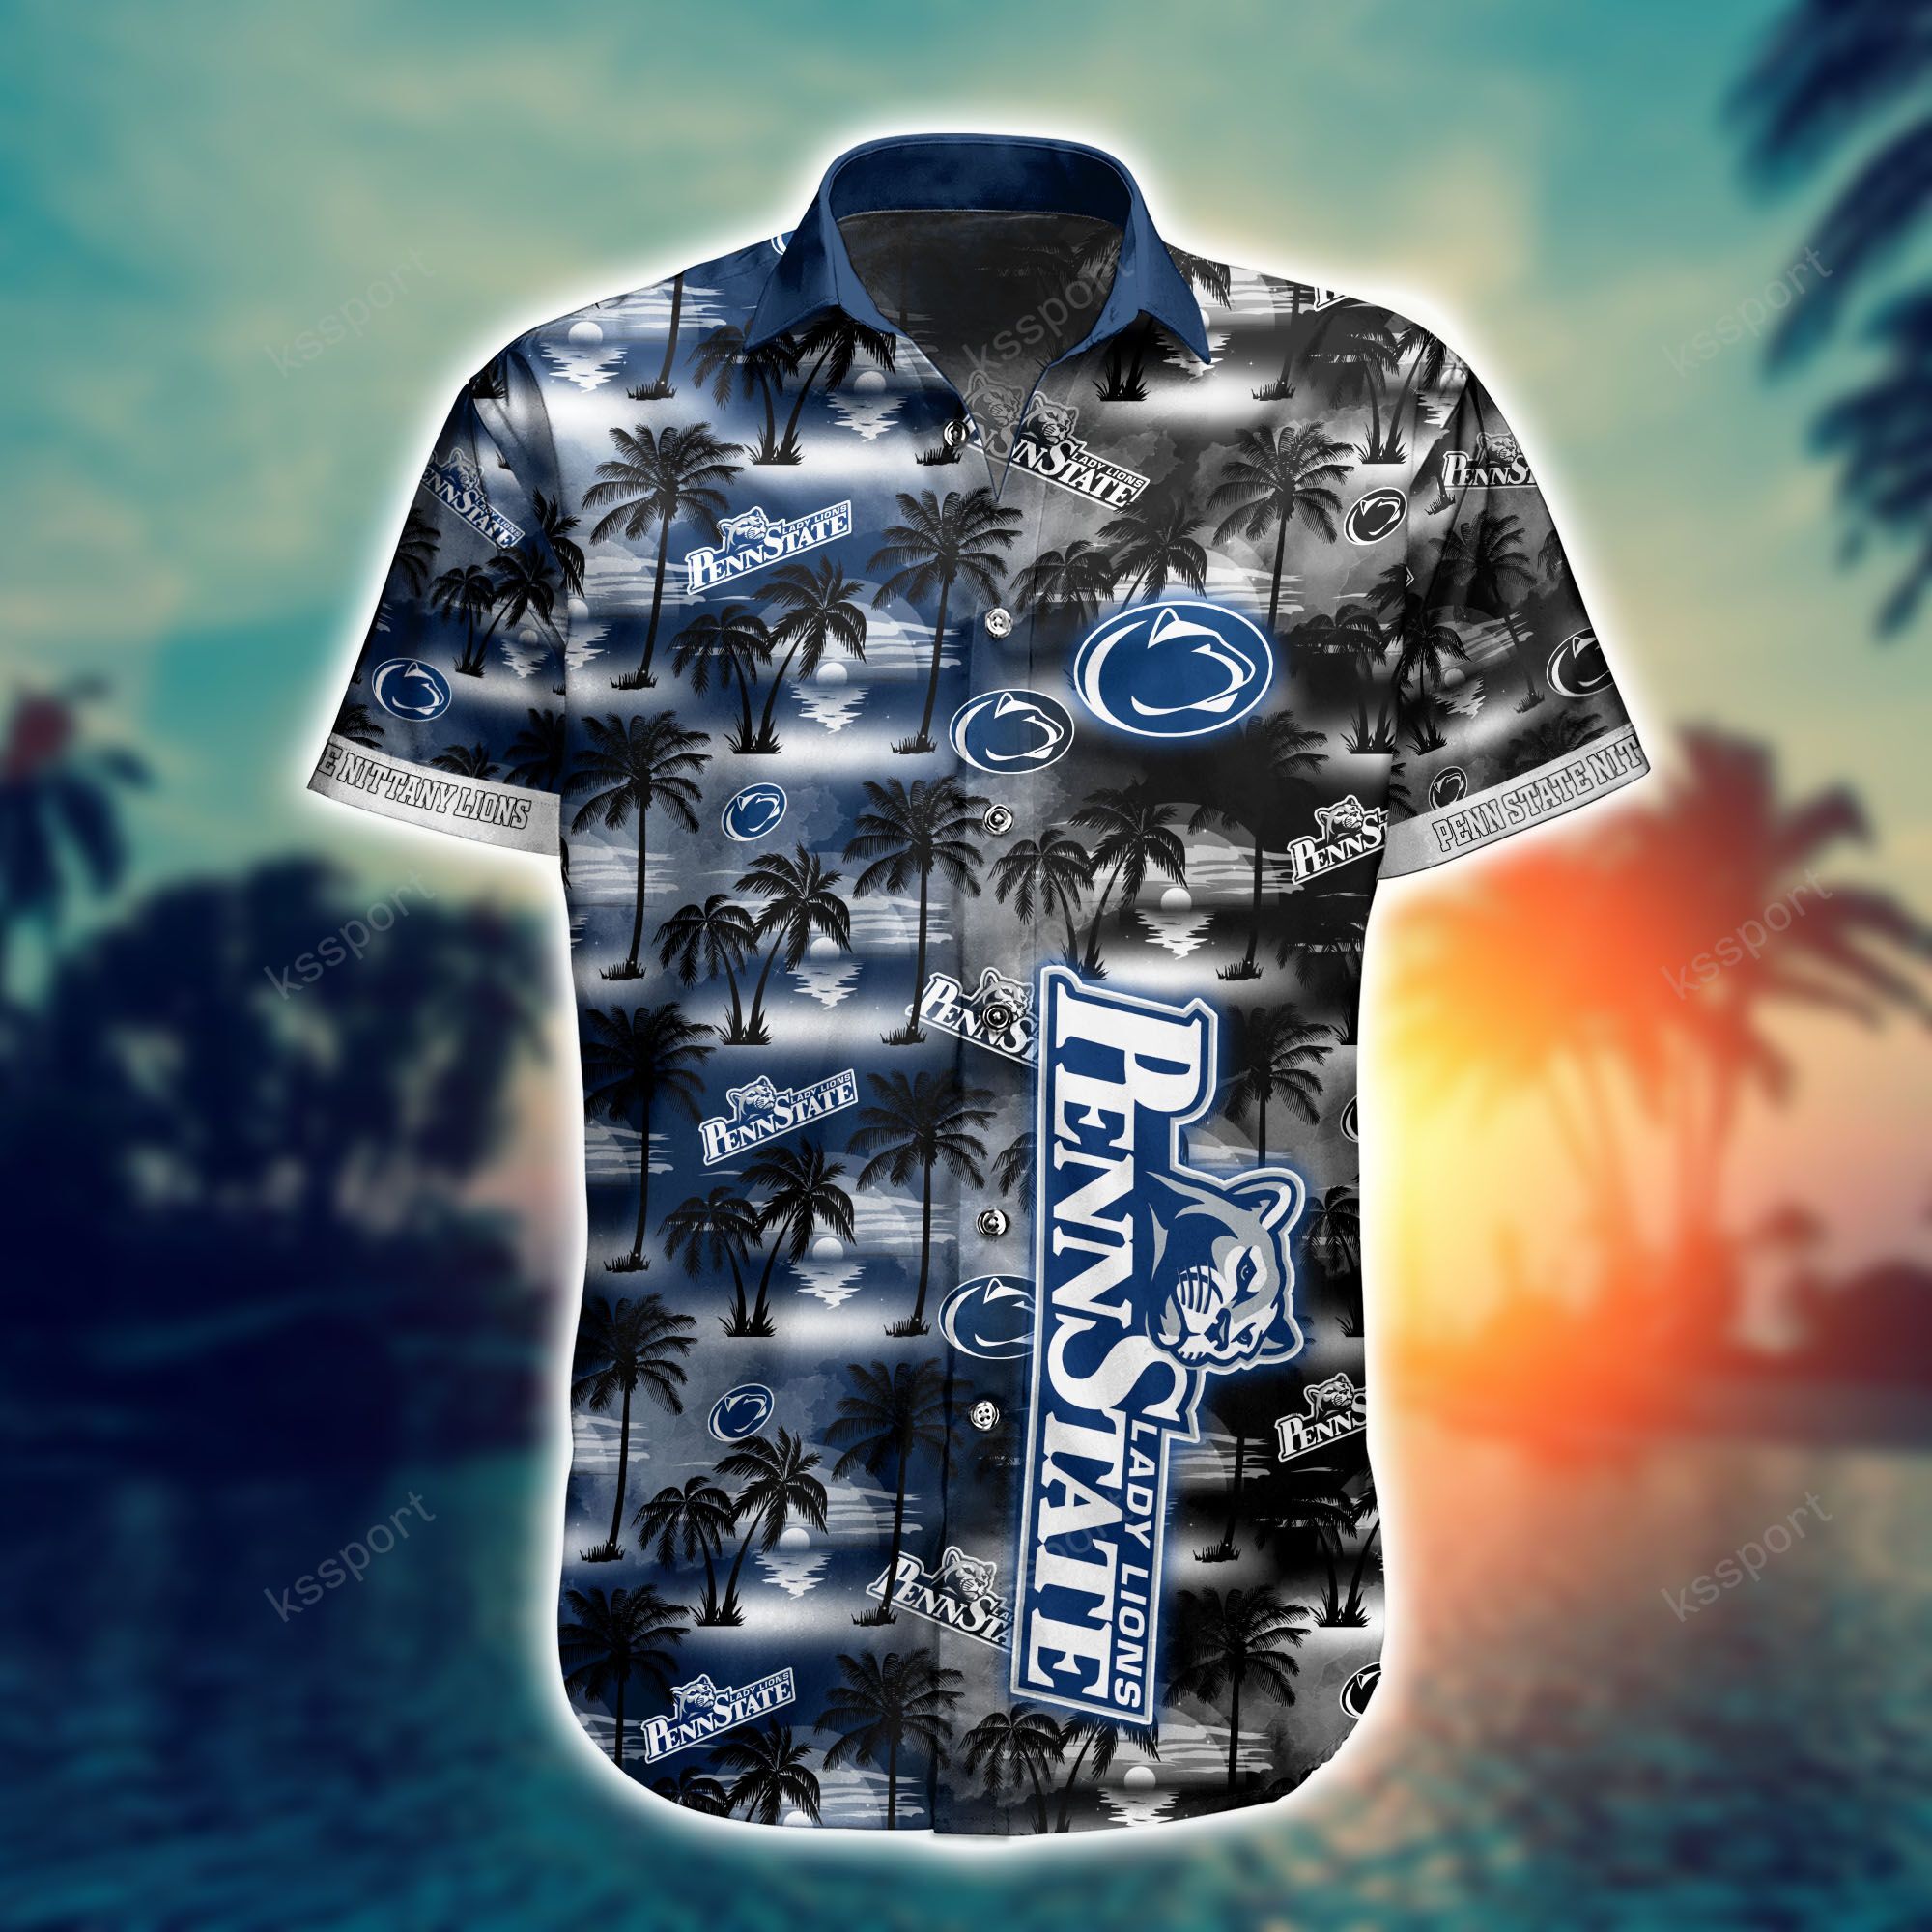 Top cool Hawaiian shirt 2022 - Make sure you get yours today before they run out! 166